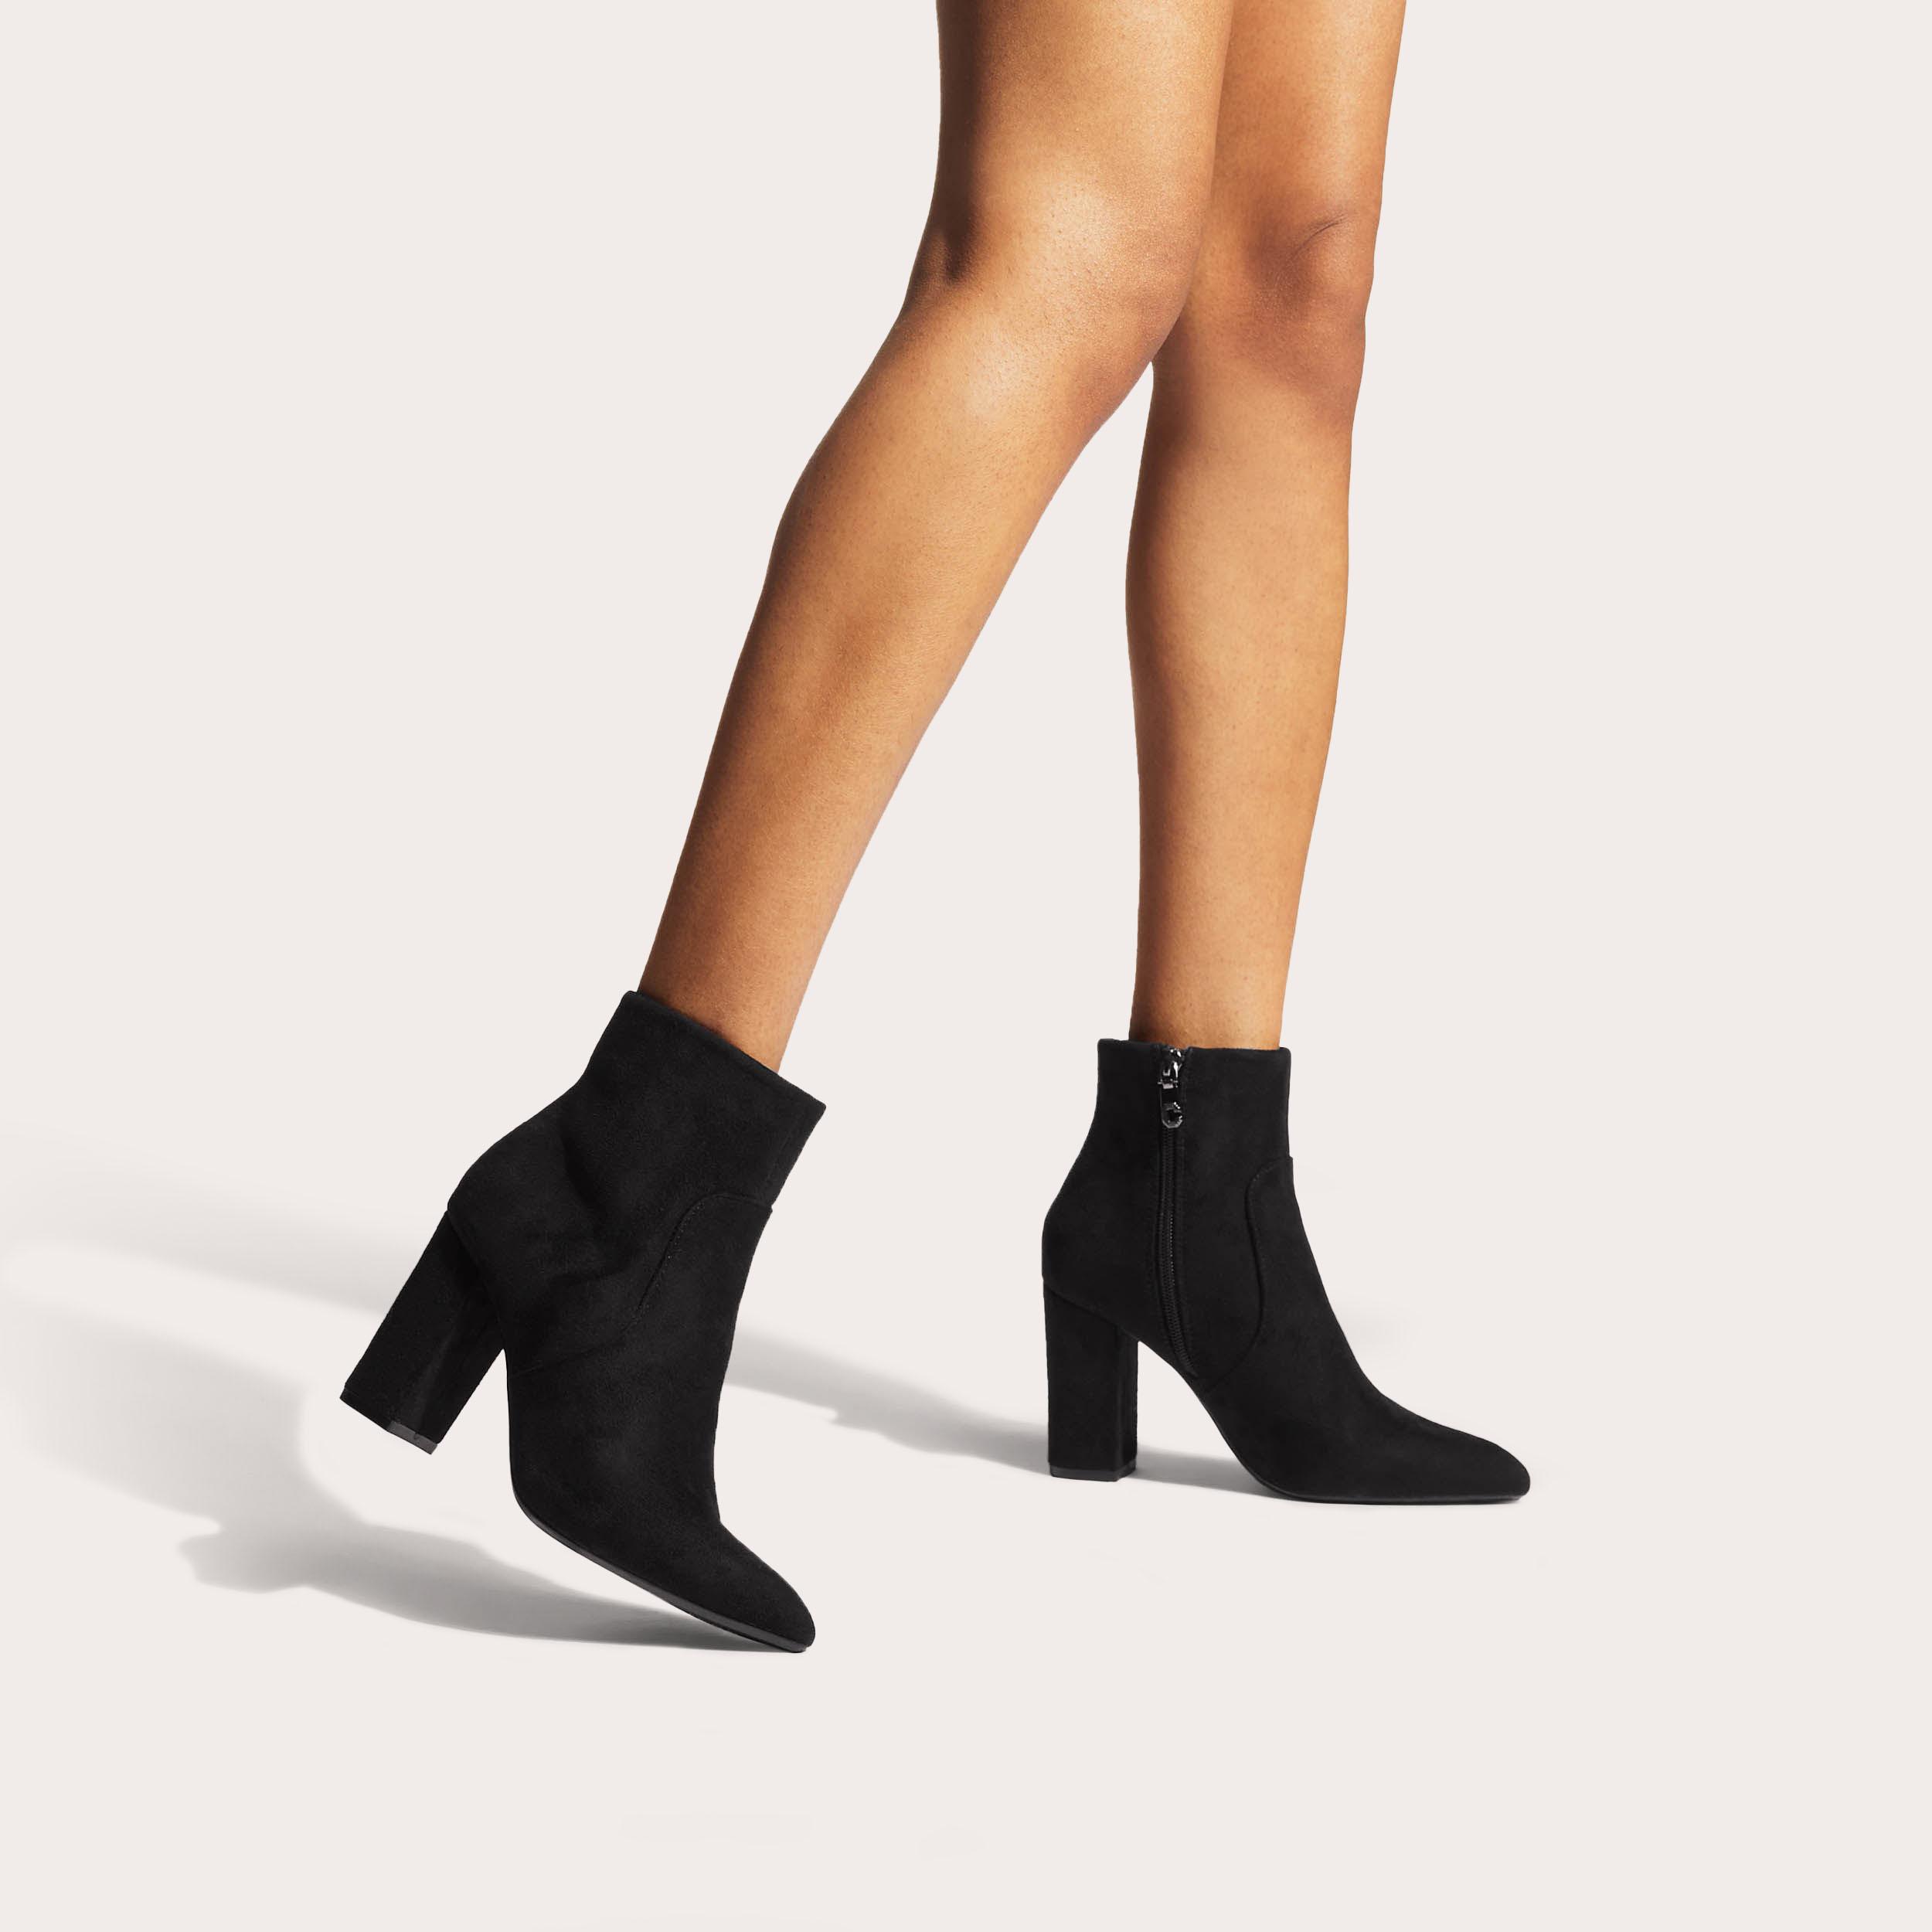 SHONE ANKLE BOOT Black Suedette Block Heel Ankle Boot by CARVELA